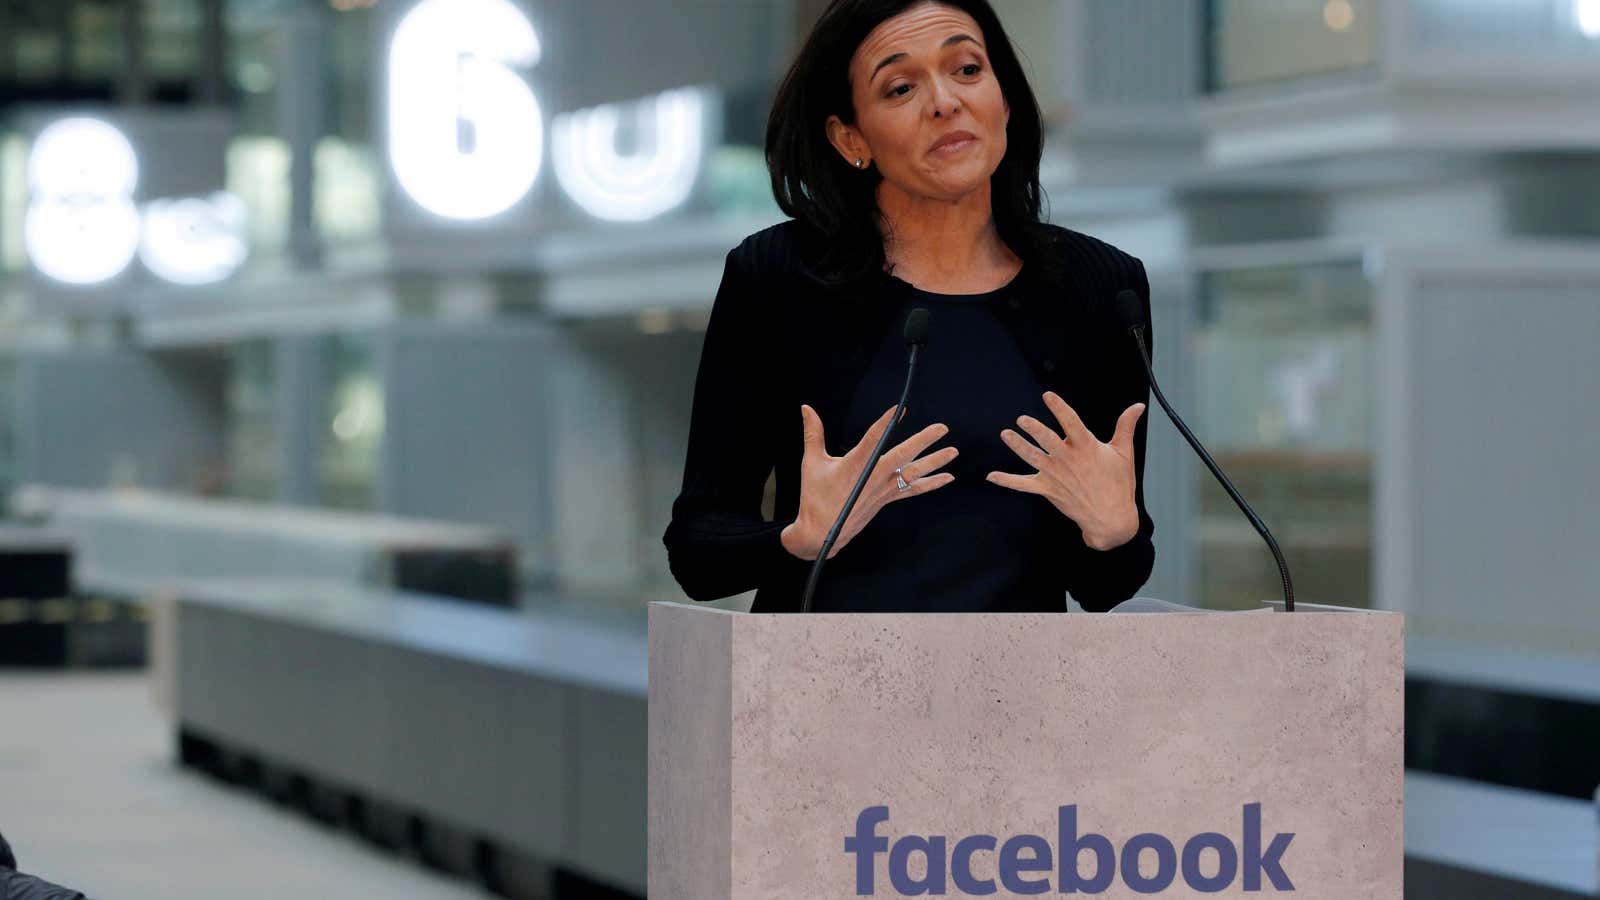 Sheryl Sandberg recently said the Facebook fights the filter bubble, not perpetuates it.